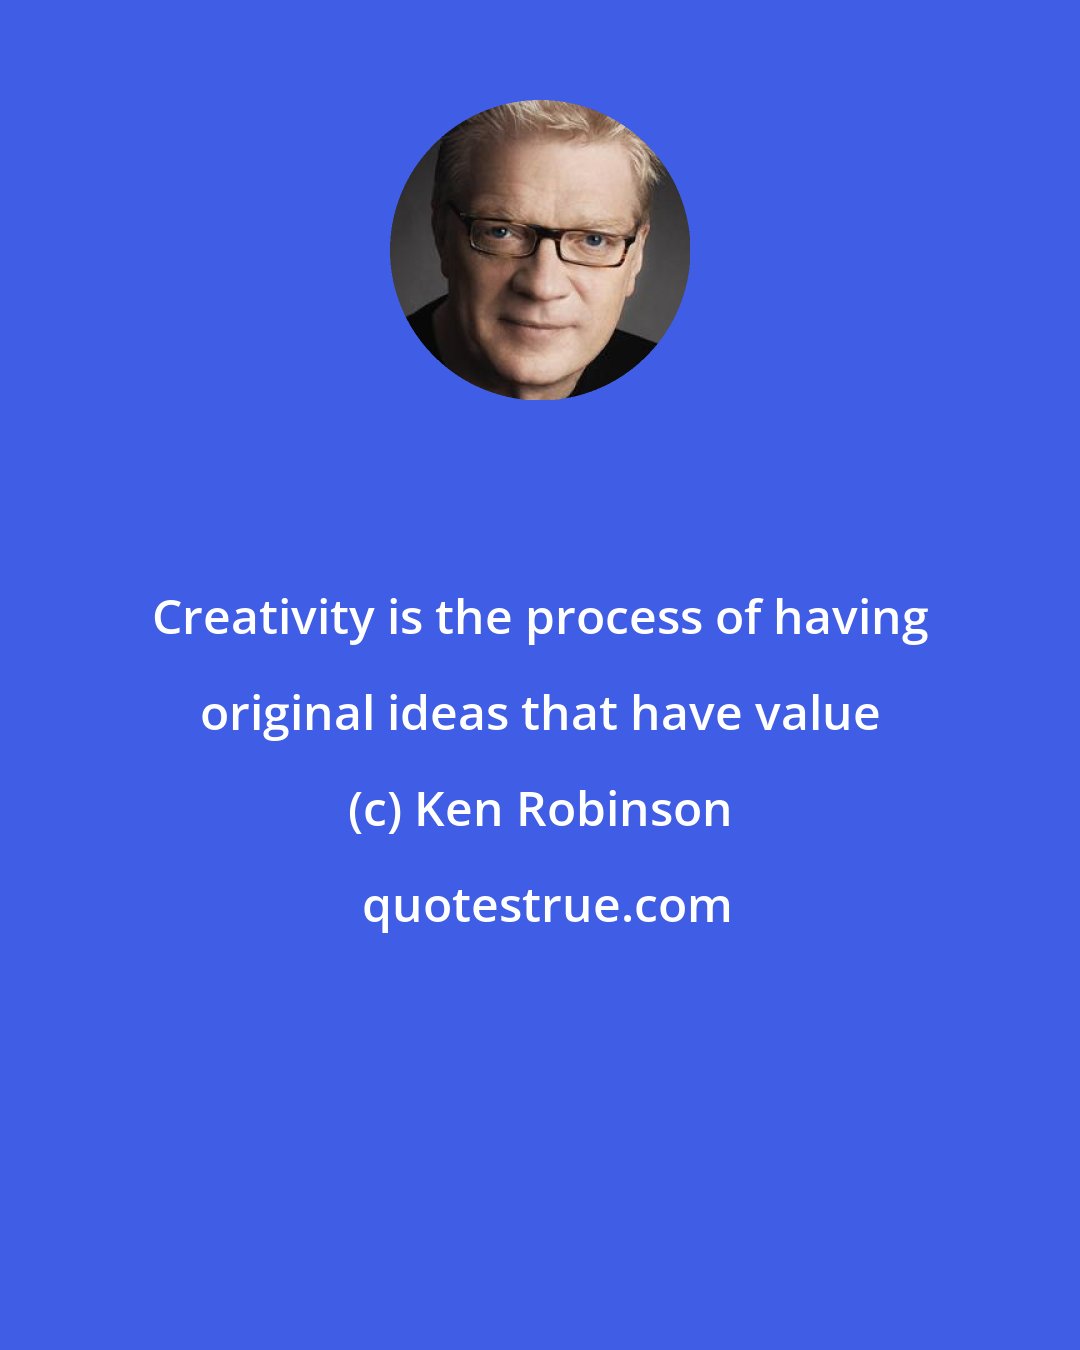 Ken Robinson: Creativity is the process of having original ideas that have value